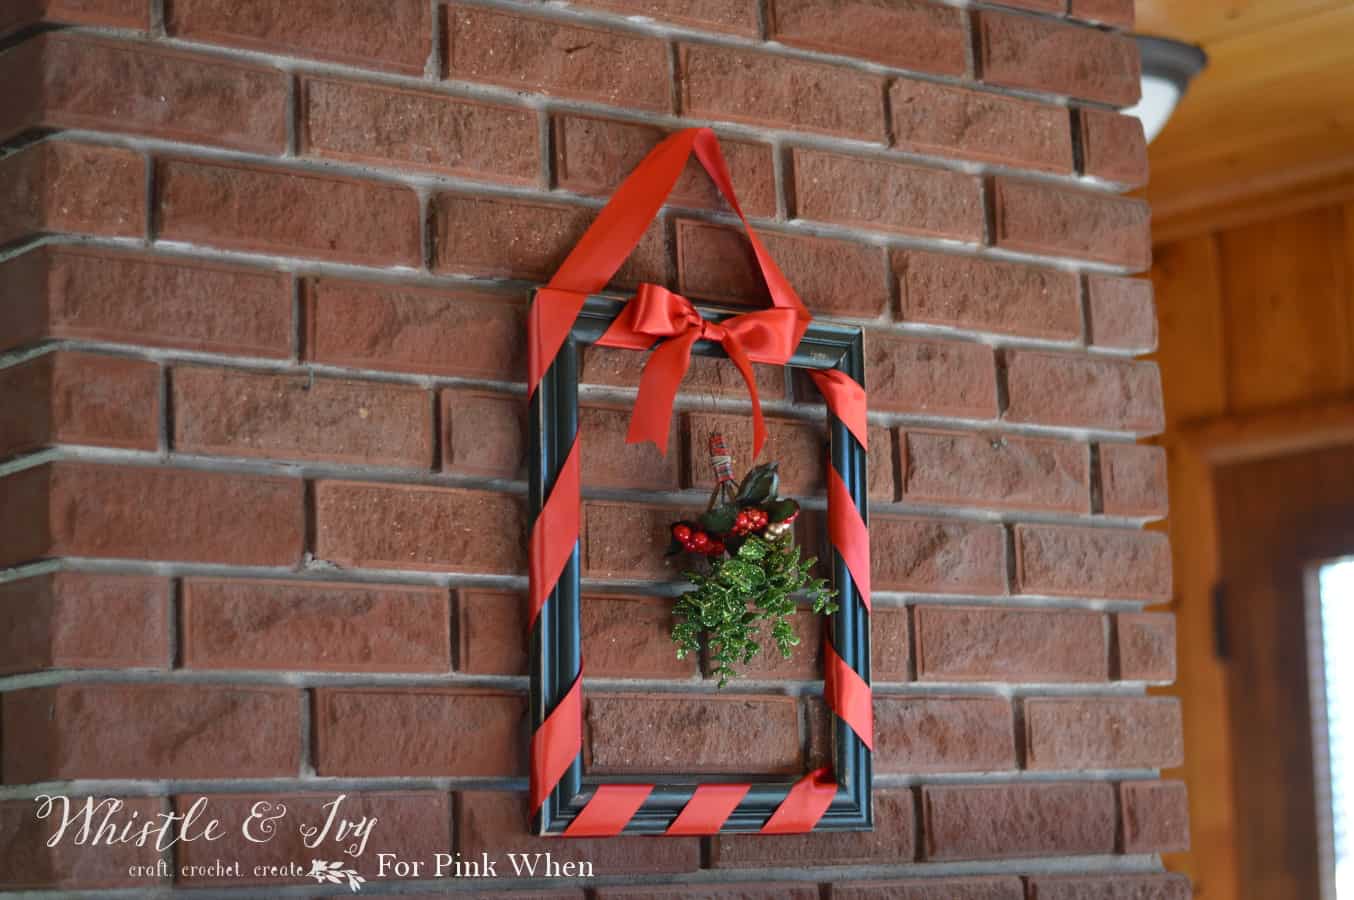 A square, dark photo frame without a back or glass insert, wrapped in red ribbon with a bunch of mistletoe hanging in the center